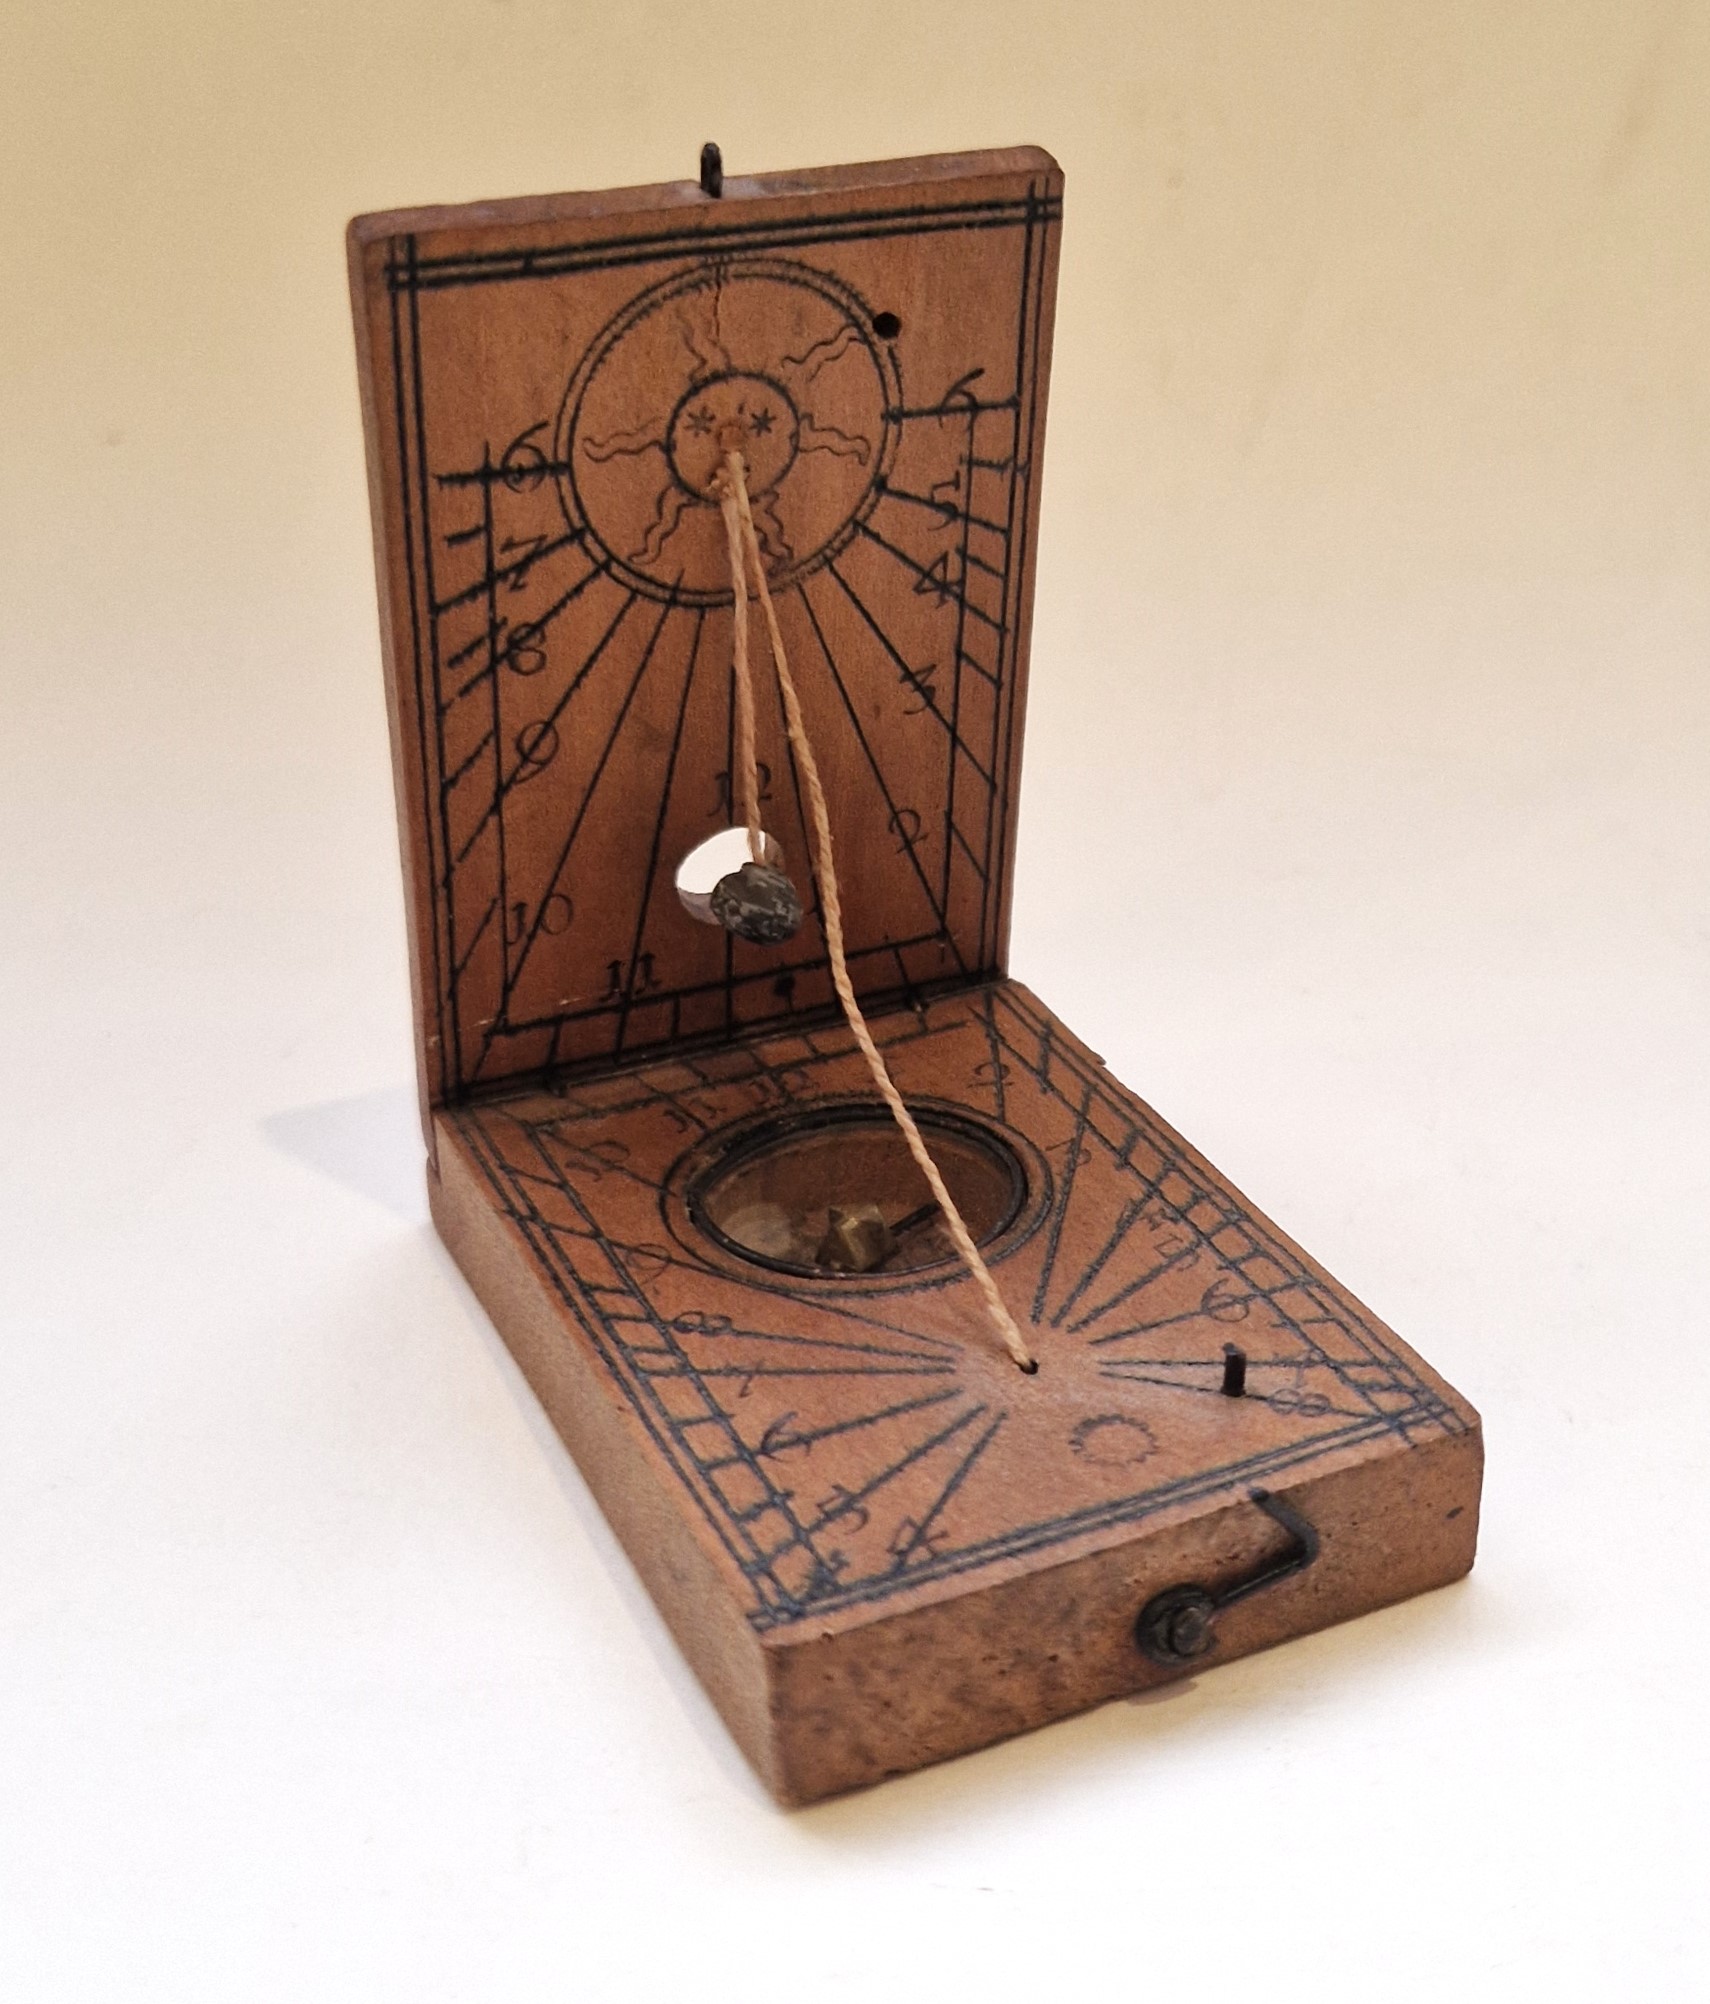 German Diptych wooden sundial, ca 1760, signed and with French provenance